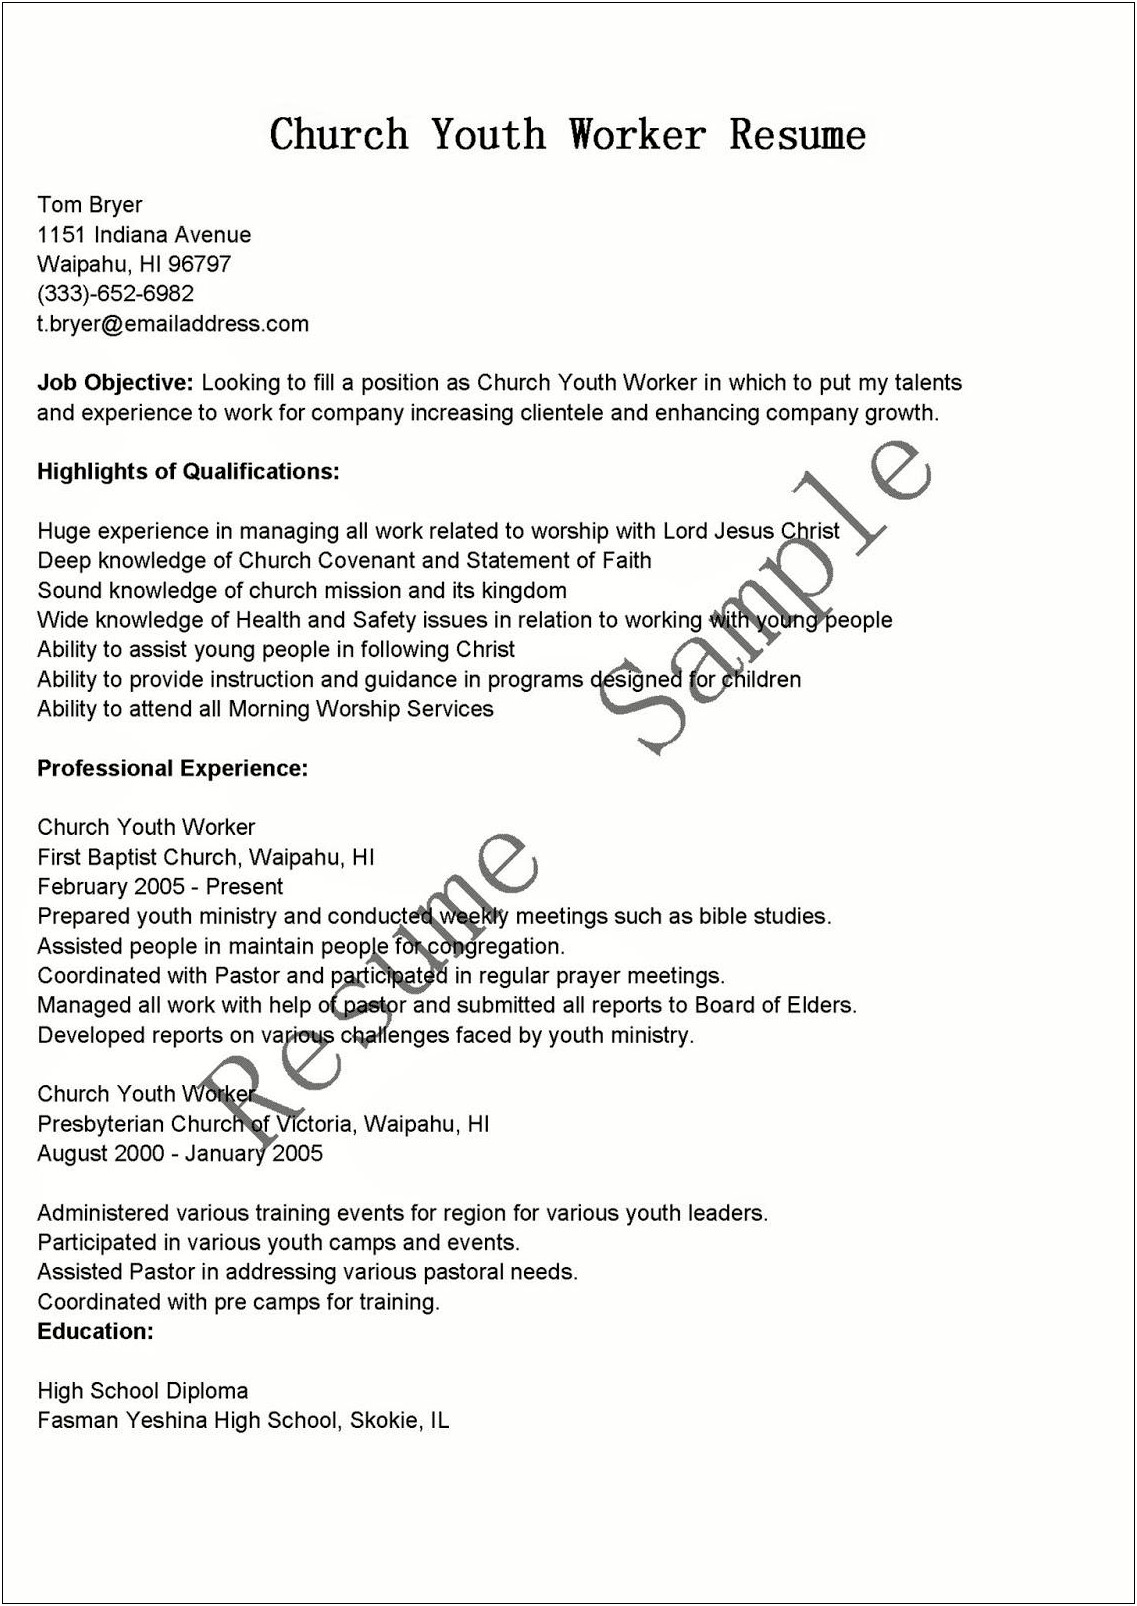 Working With At Risk Youth Resume